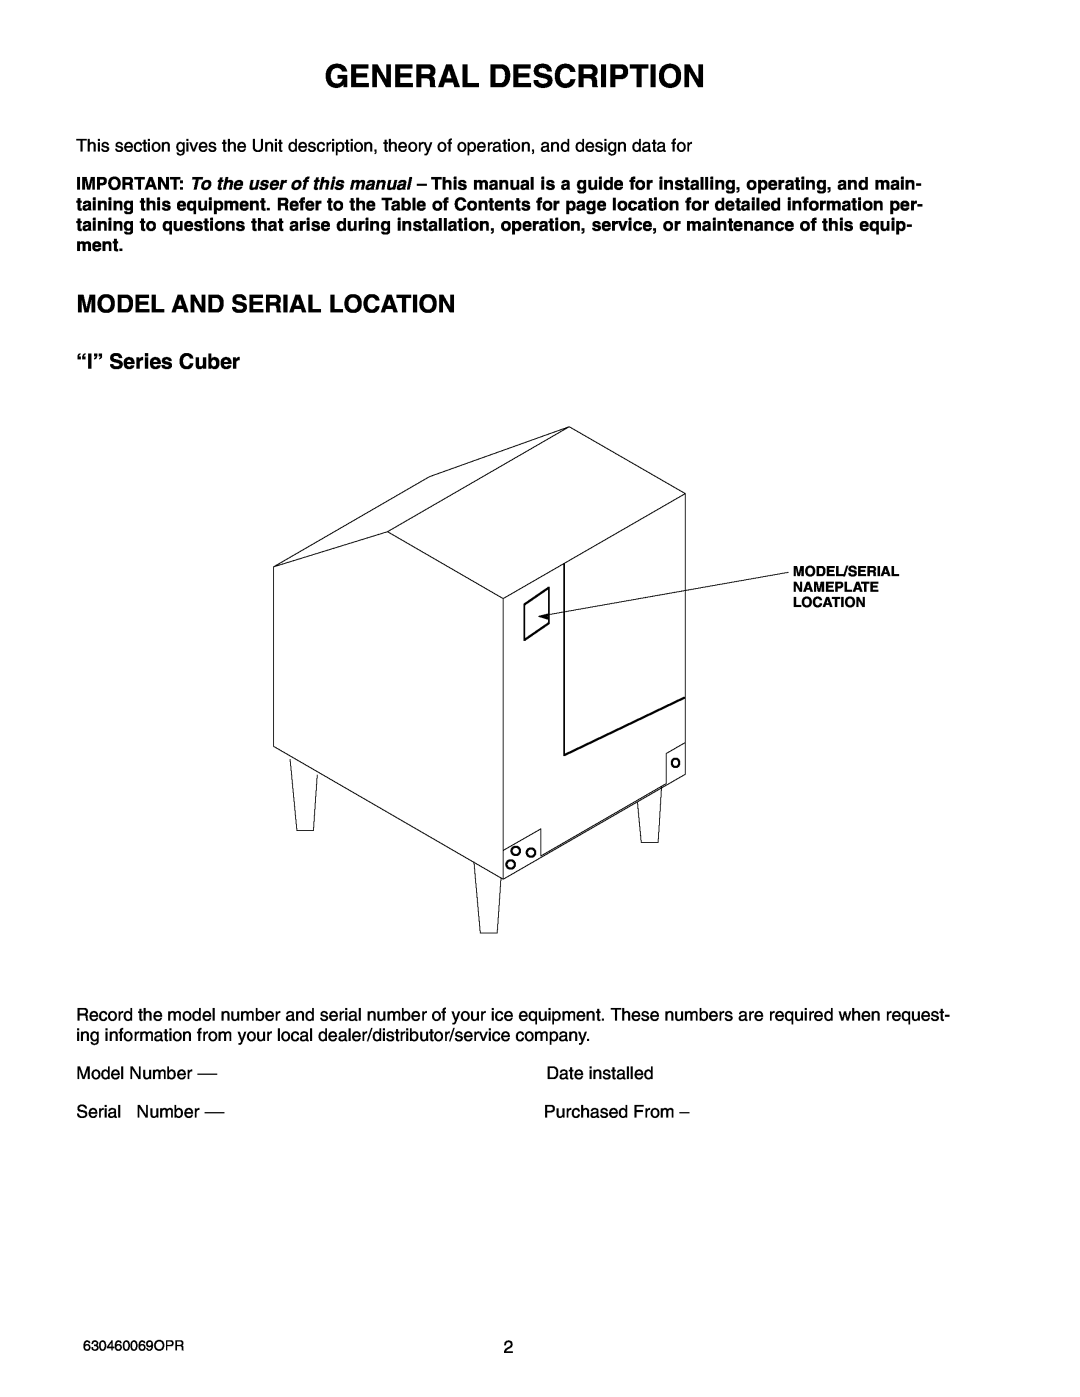 Maytag 224 manual General Description, Model And Serial Location, “I” Series Cuber 